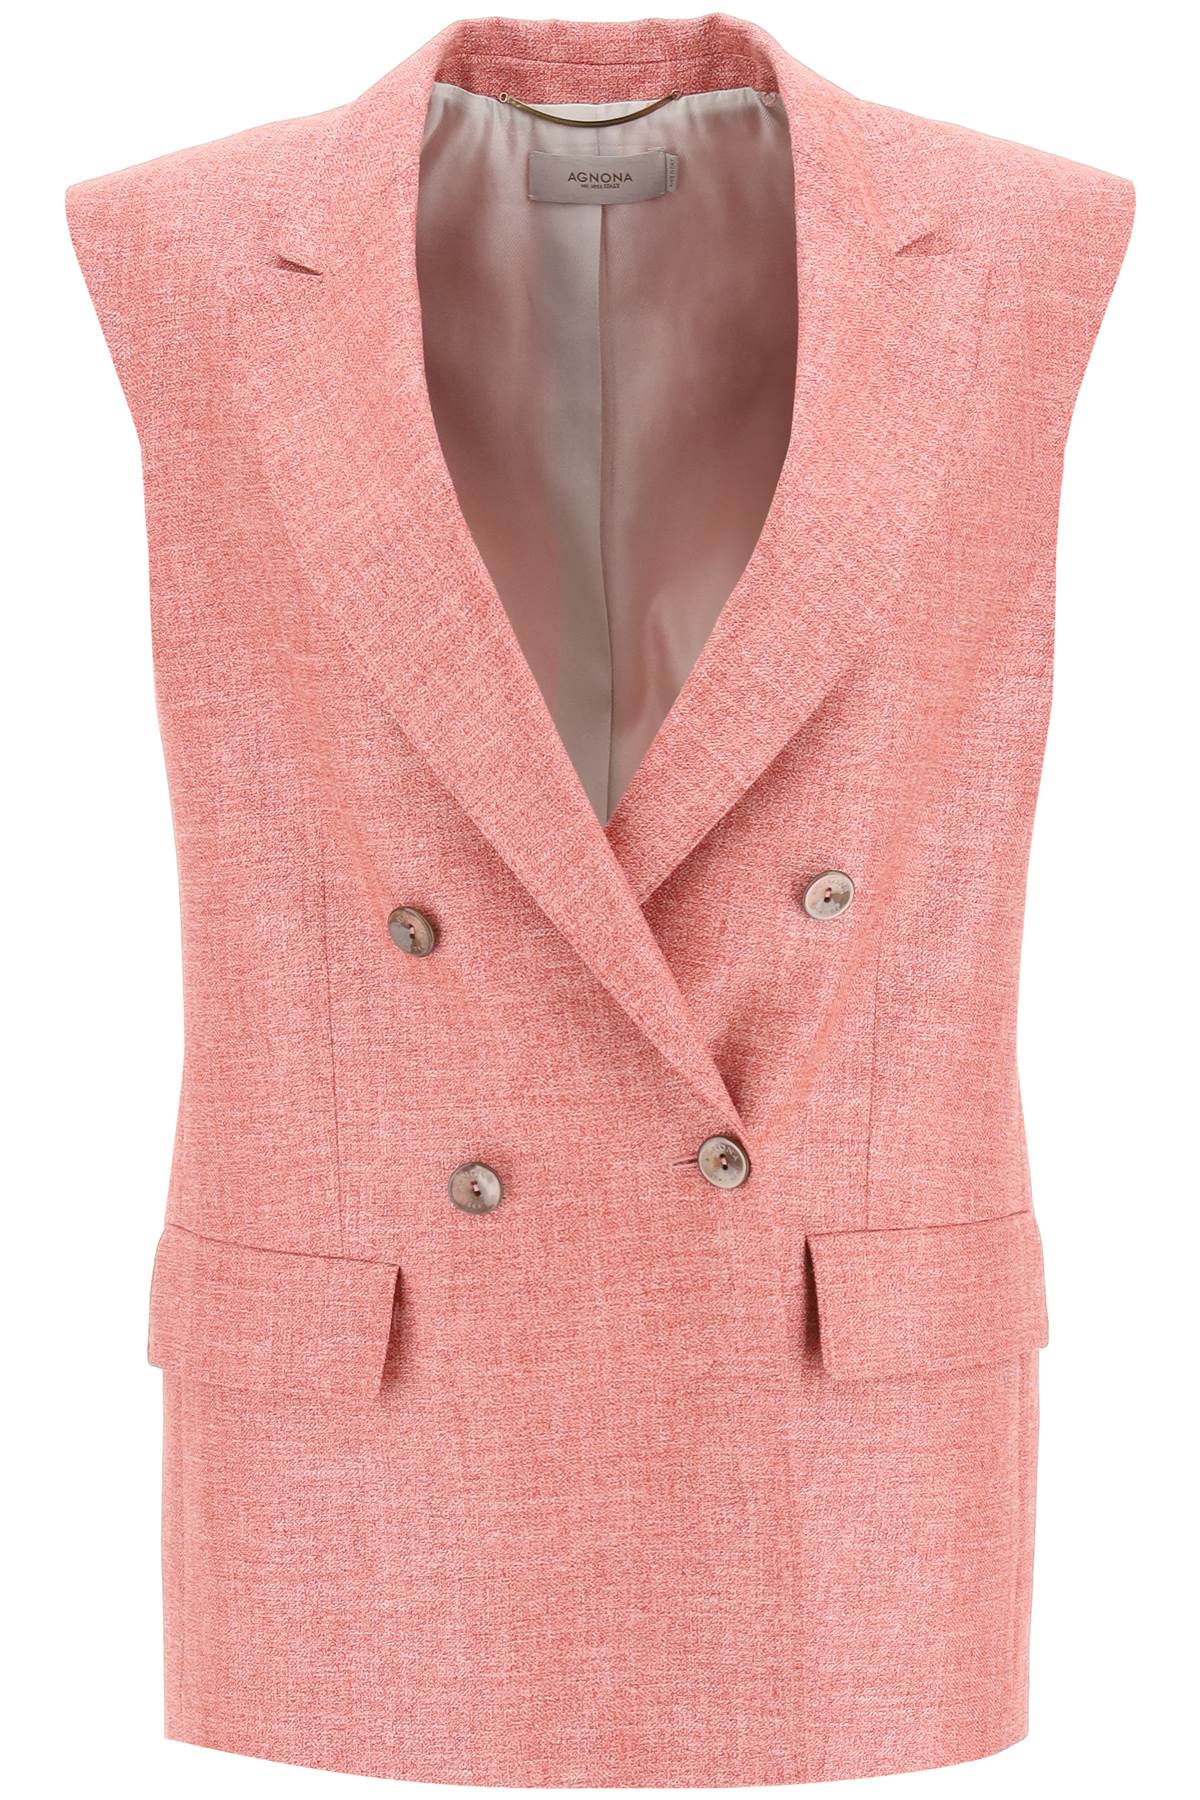 Agnona double-breasted vest in silk, linen and wool TX0502 X F4006 ROMEO